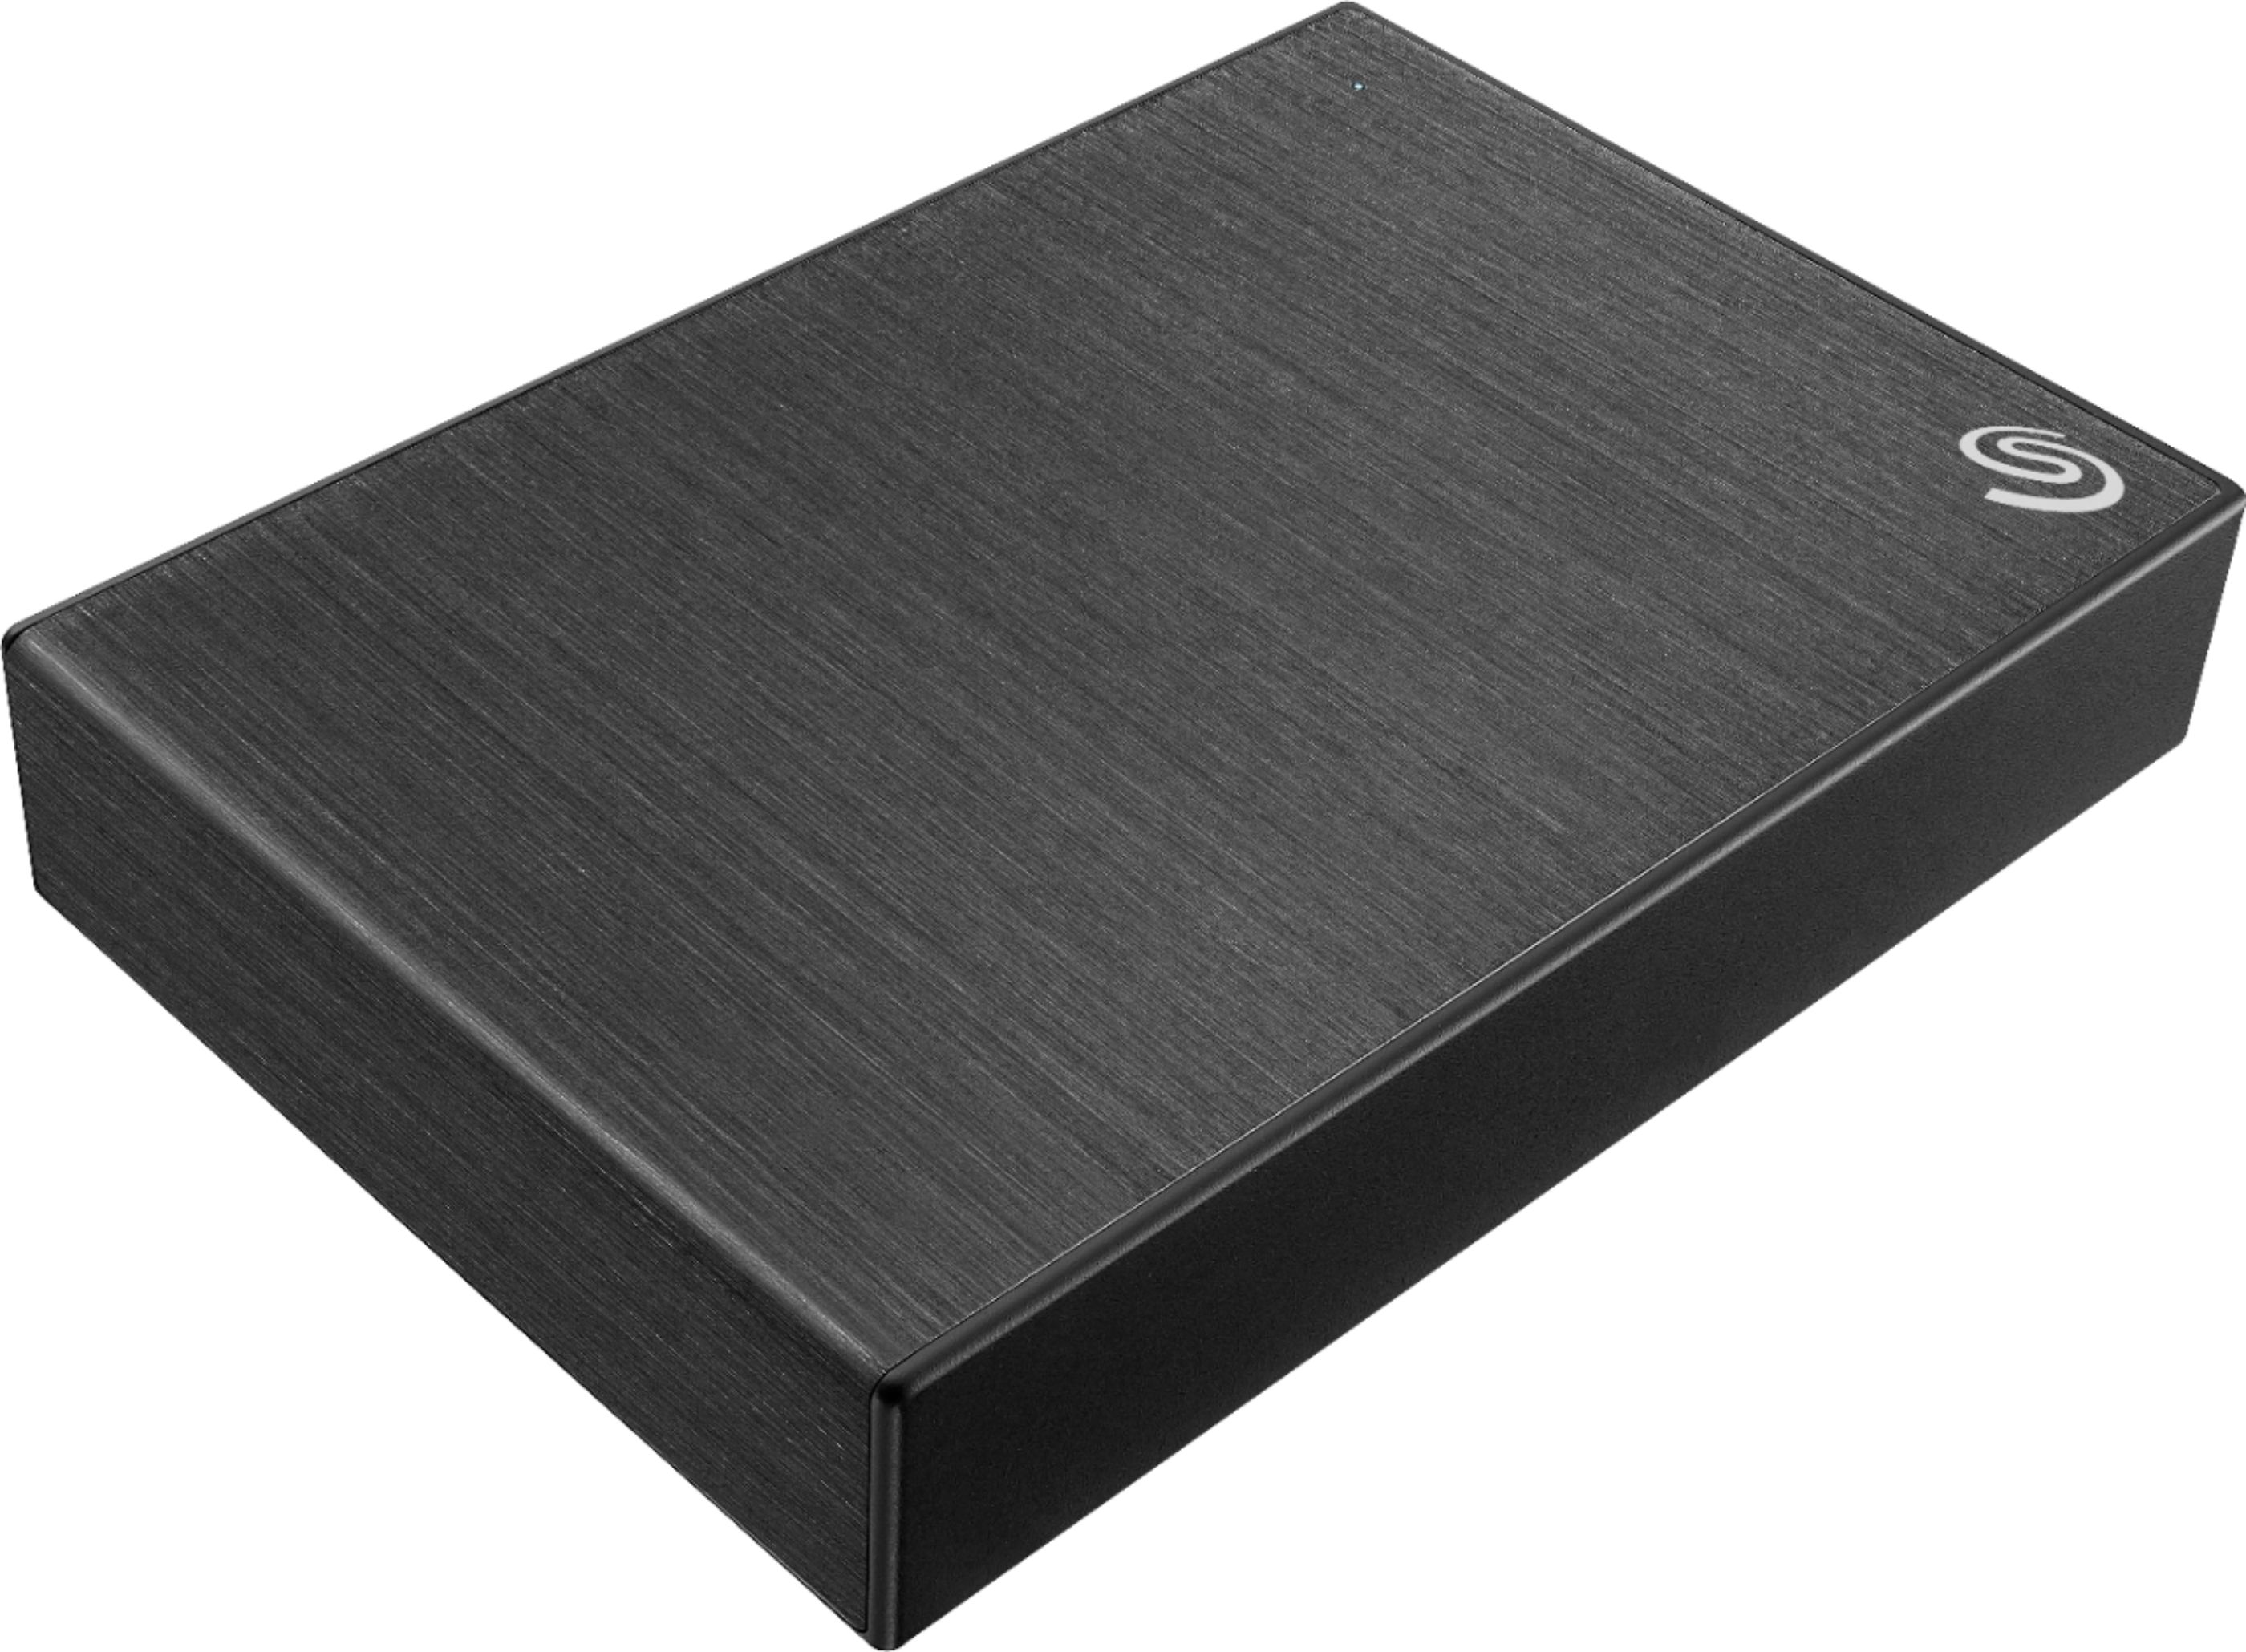 Seagate - Disque Dur Externe - One Touch Hdd - 1to - Usb 3.0 (stkb1000400)  à Prix Carrefour